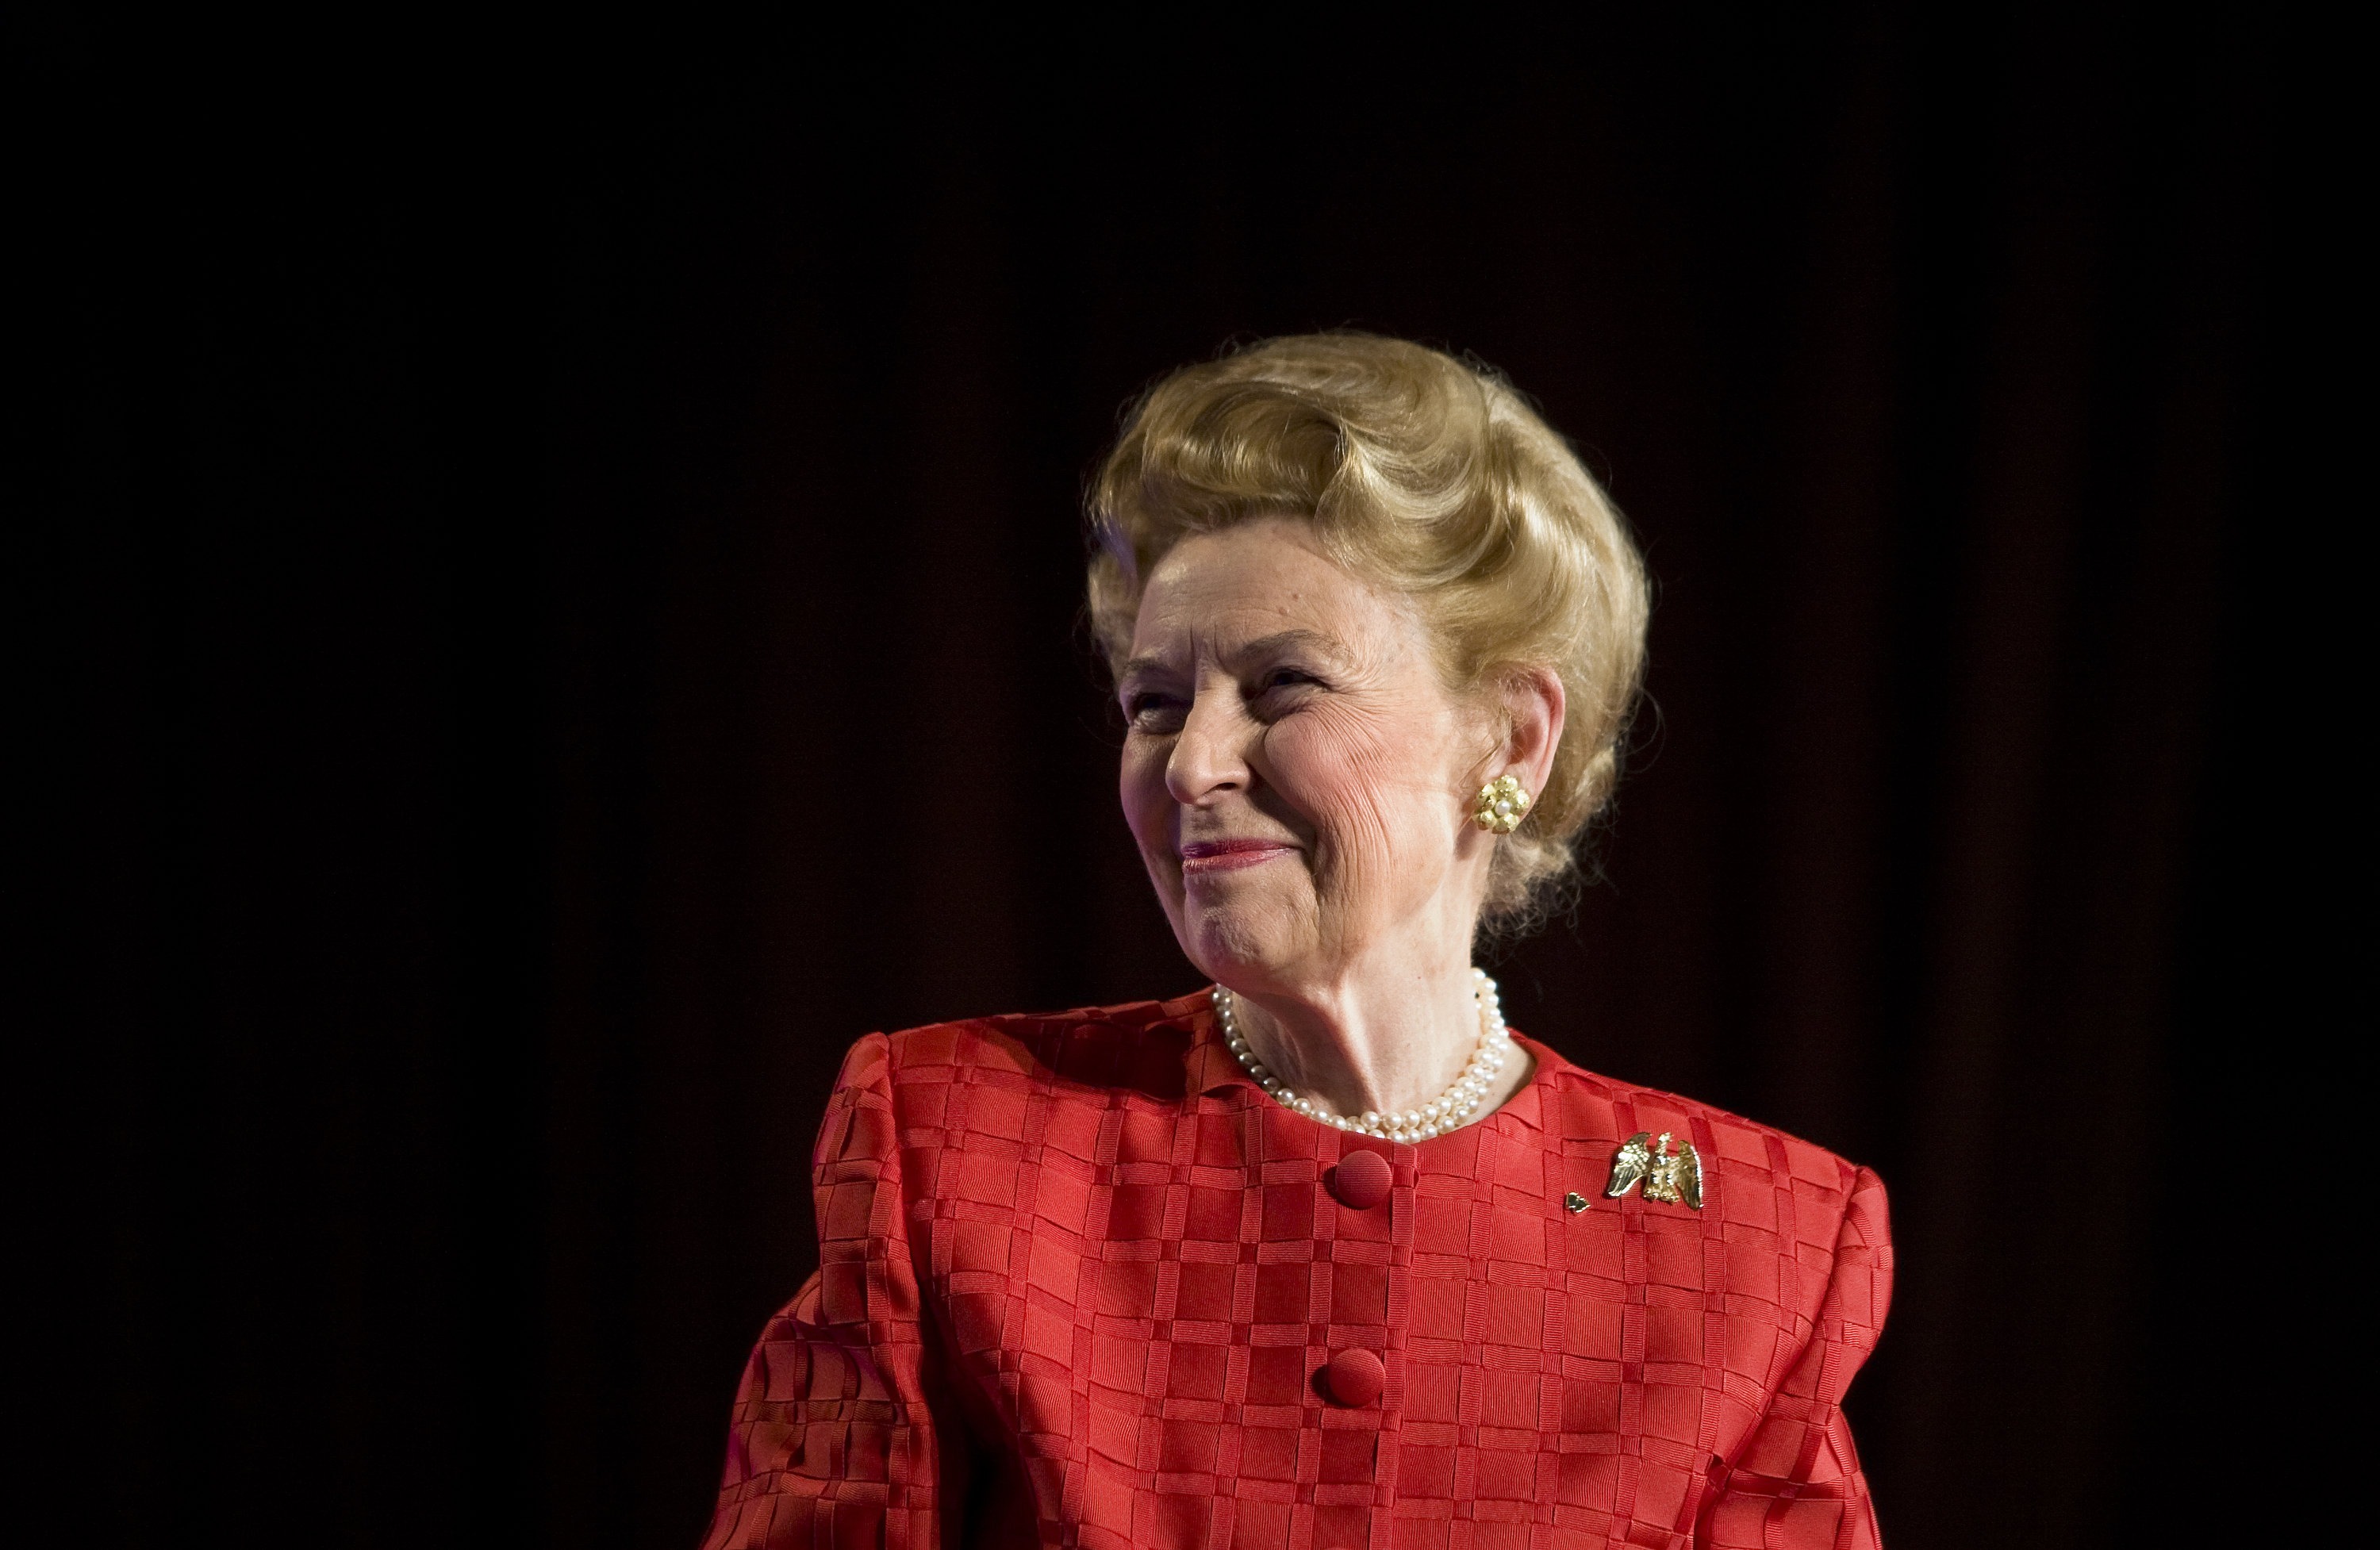 Conservative icon Phyllis Schlafly during the Family Research Council's briefing in Washington, D.C., on October 19, 2007. (Brendan Smialowski&mdash;Getty Images)